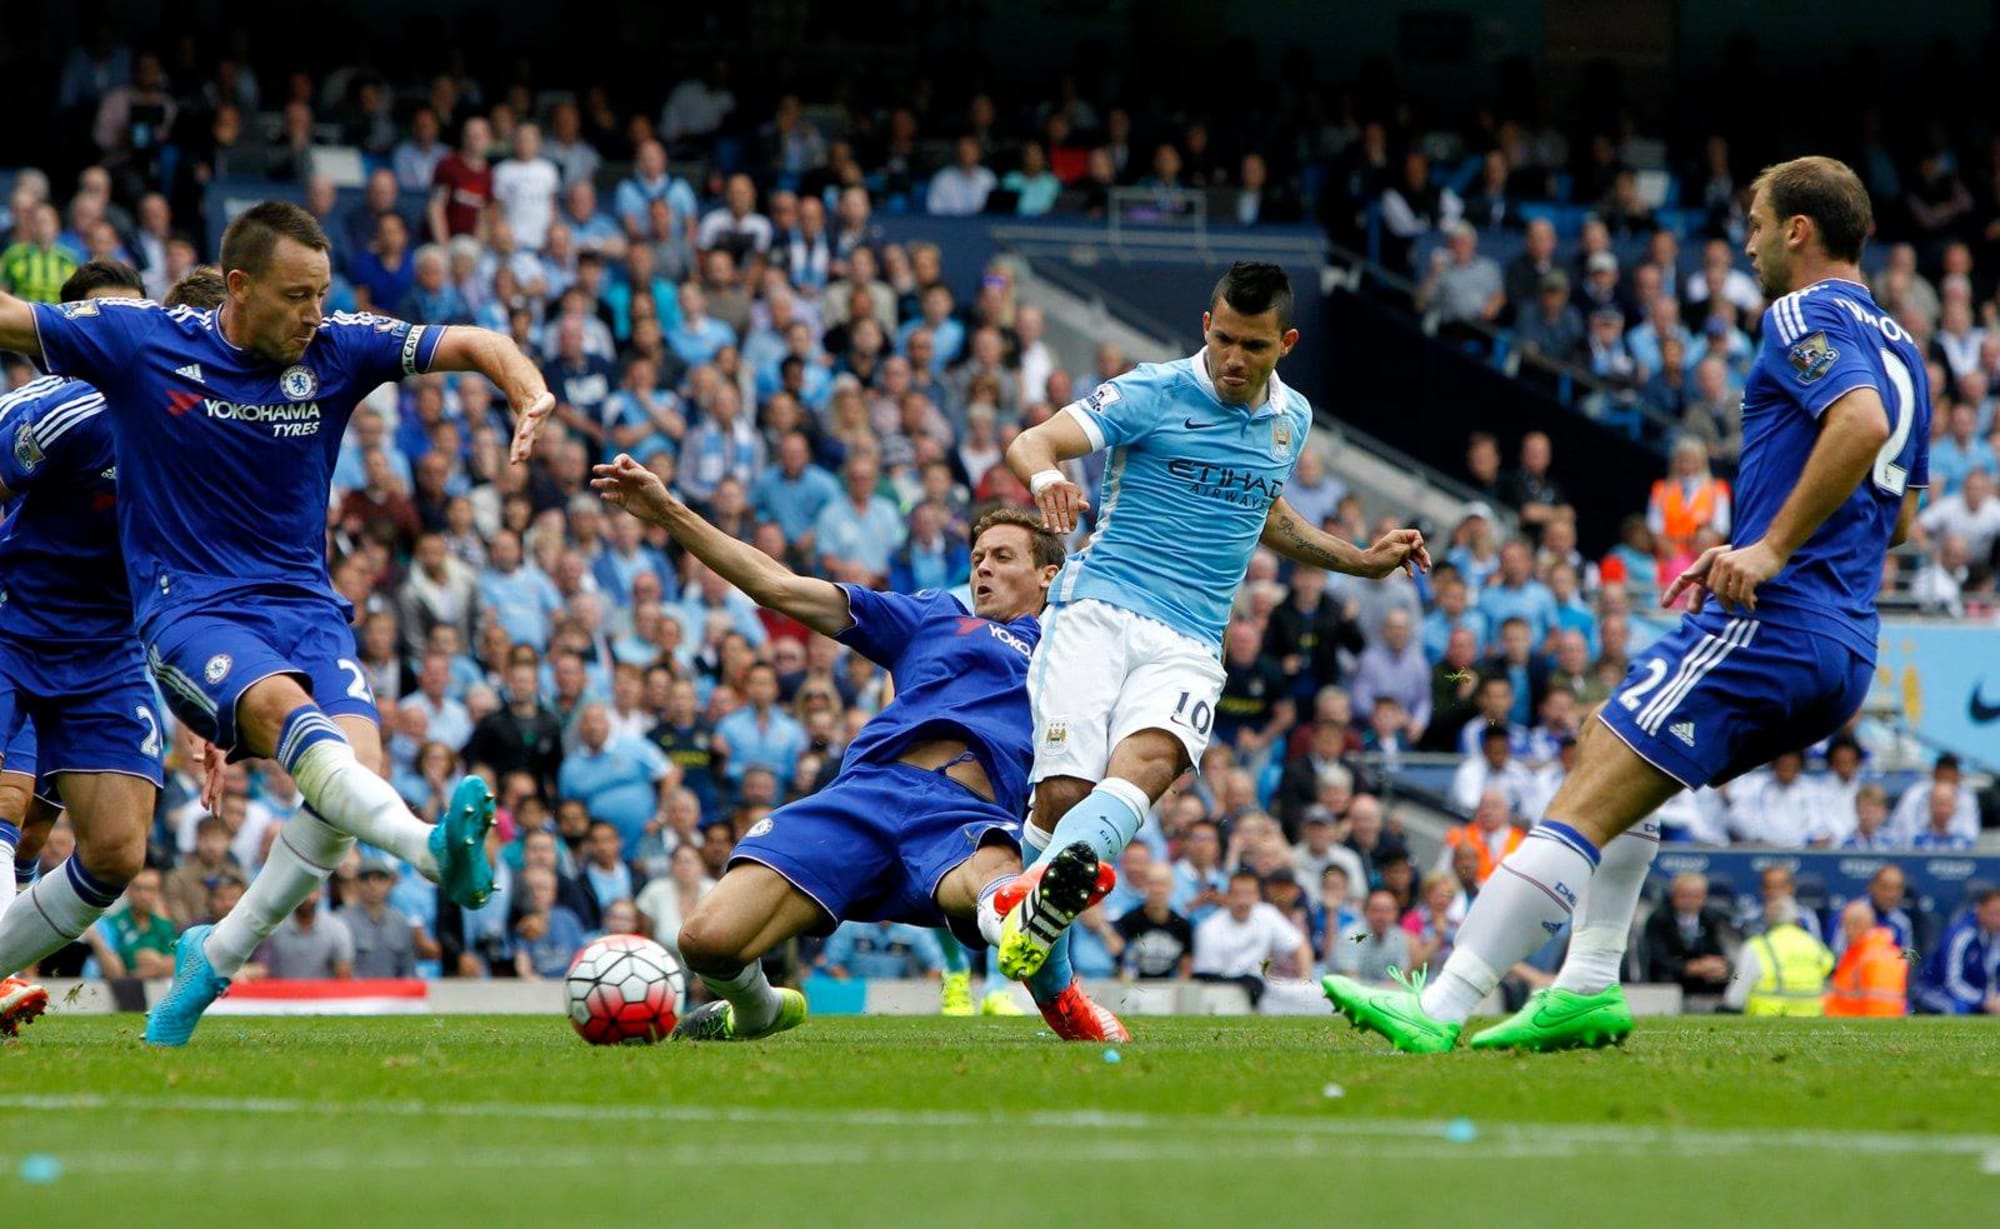 Manchester City Makes Statement in Win Over Chelsea